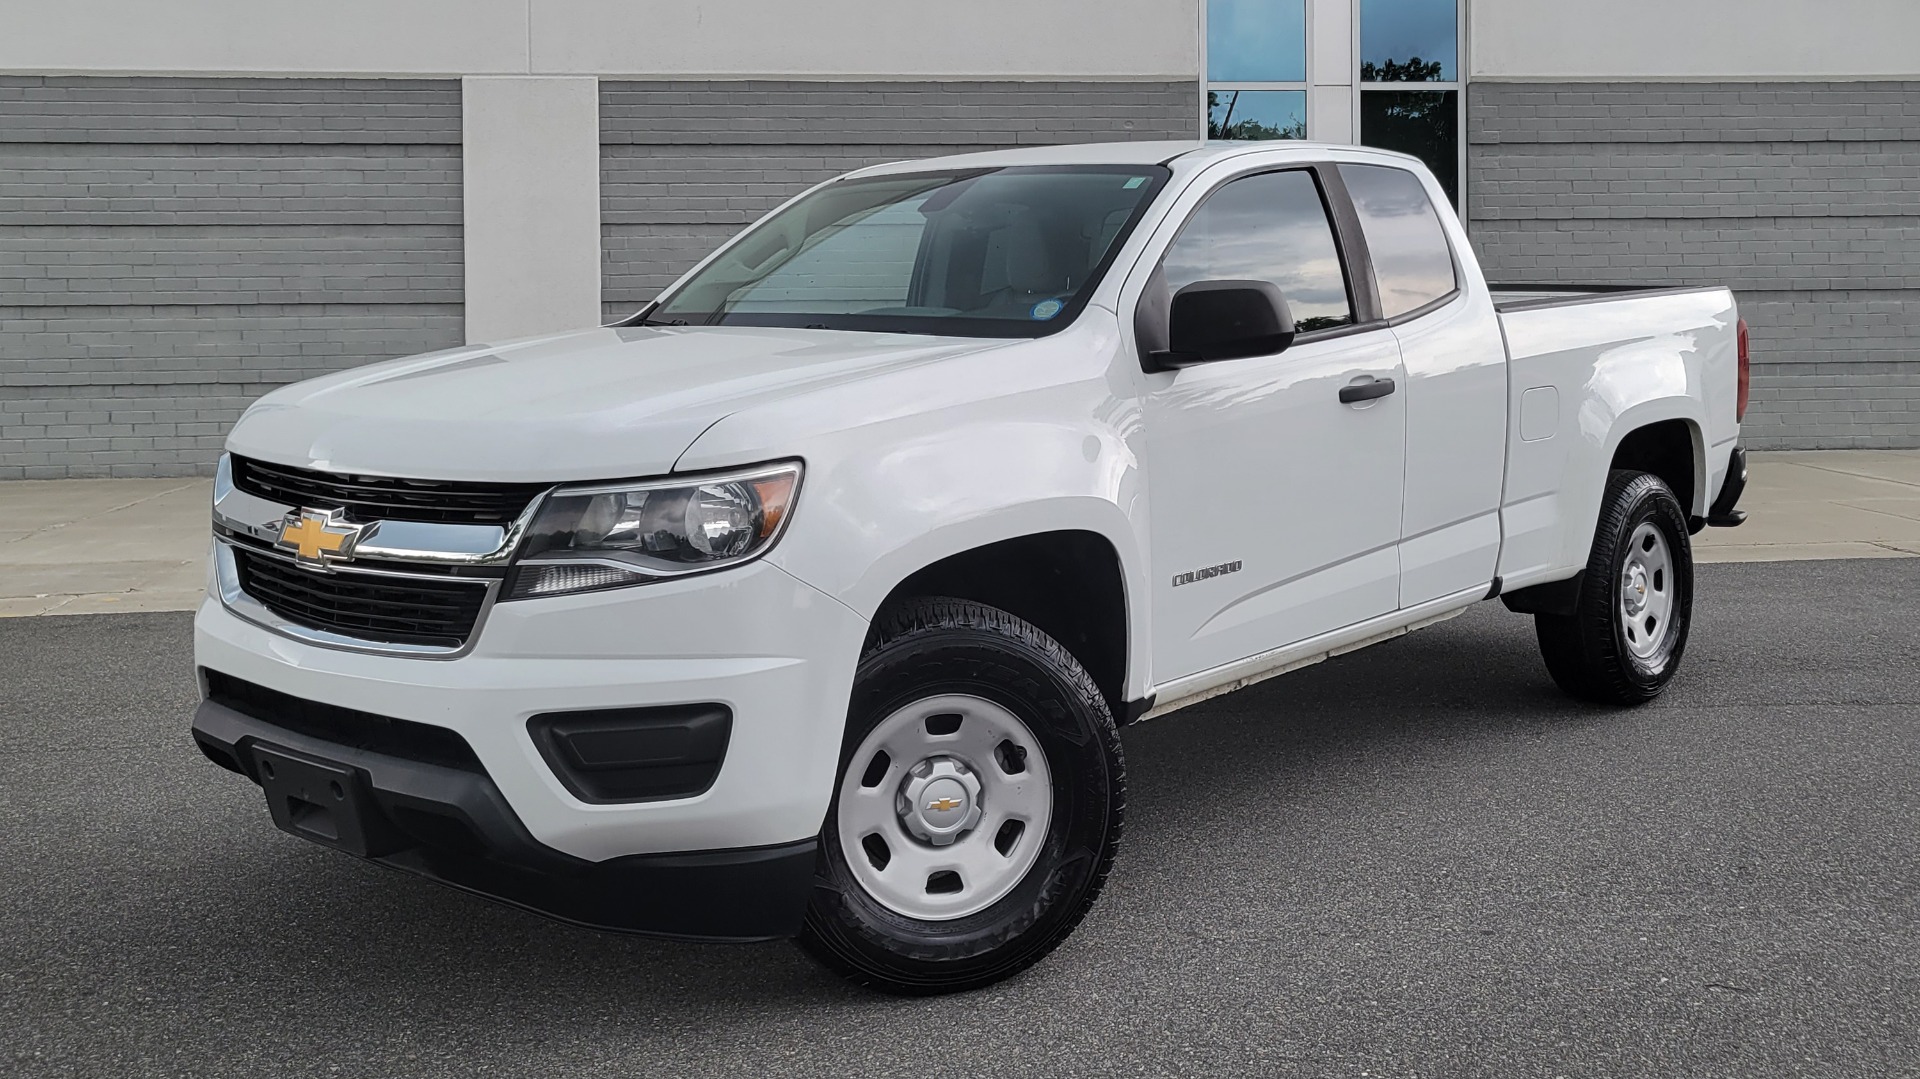 Used 2018 Chevrolet COLORADO EXT CAB / 2.5L / 2WD / 6-SPD AUTO / WORK TRUCK / REARVIEW for sale Sold at Formula Imports in Charlotte NC 28227 1